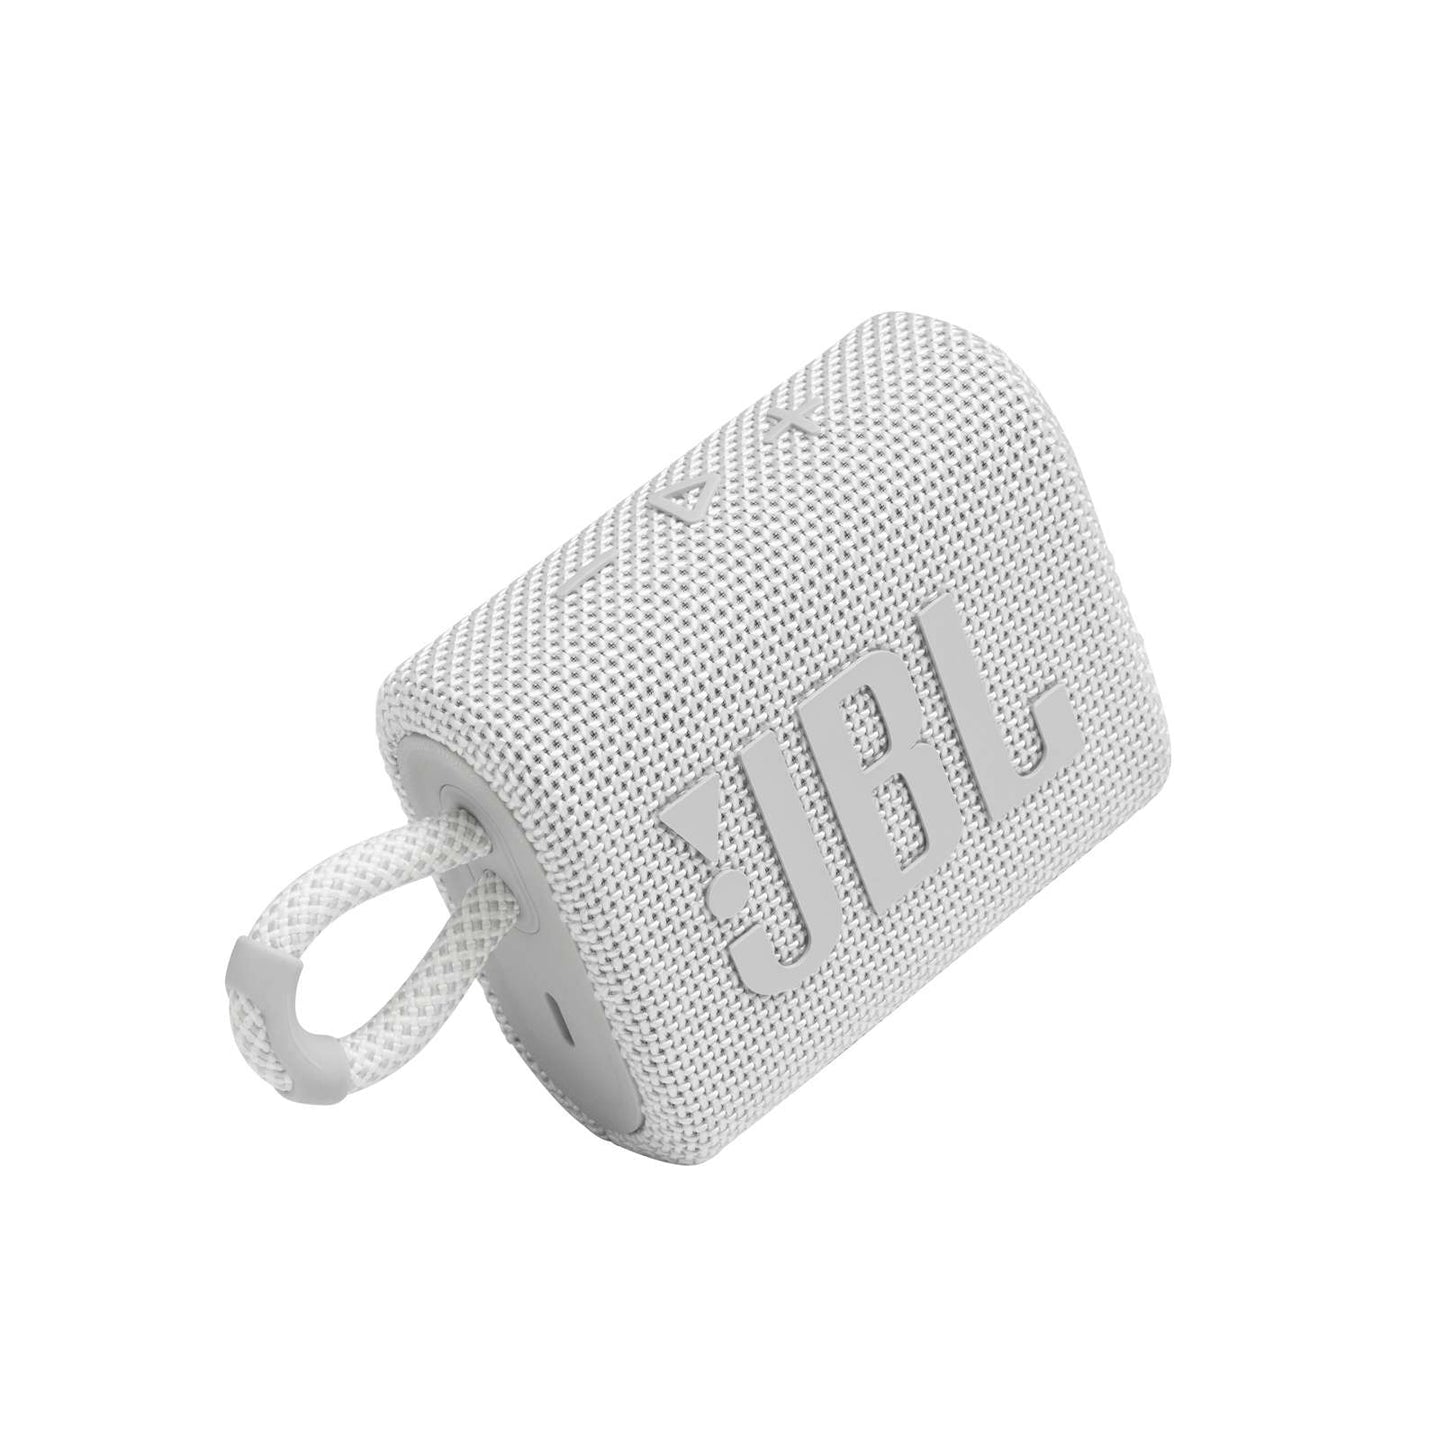 JBL GO 3 Portable Bluetooth Speaker, Wireless Speaker Box with Compact Design, IPX67 Water and Dust Resistant, up to 5 h of Battery Life, USB, White